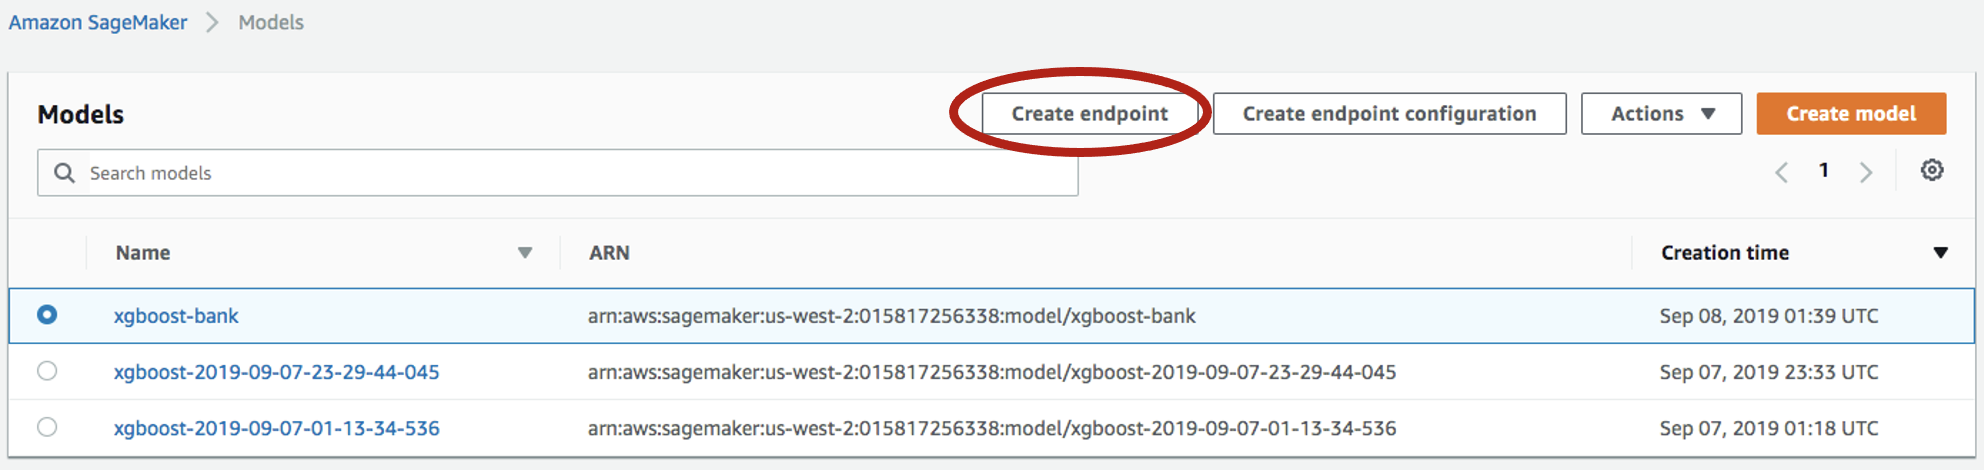 Create endpoint